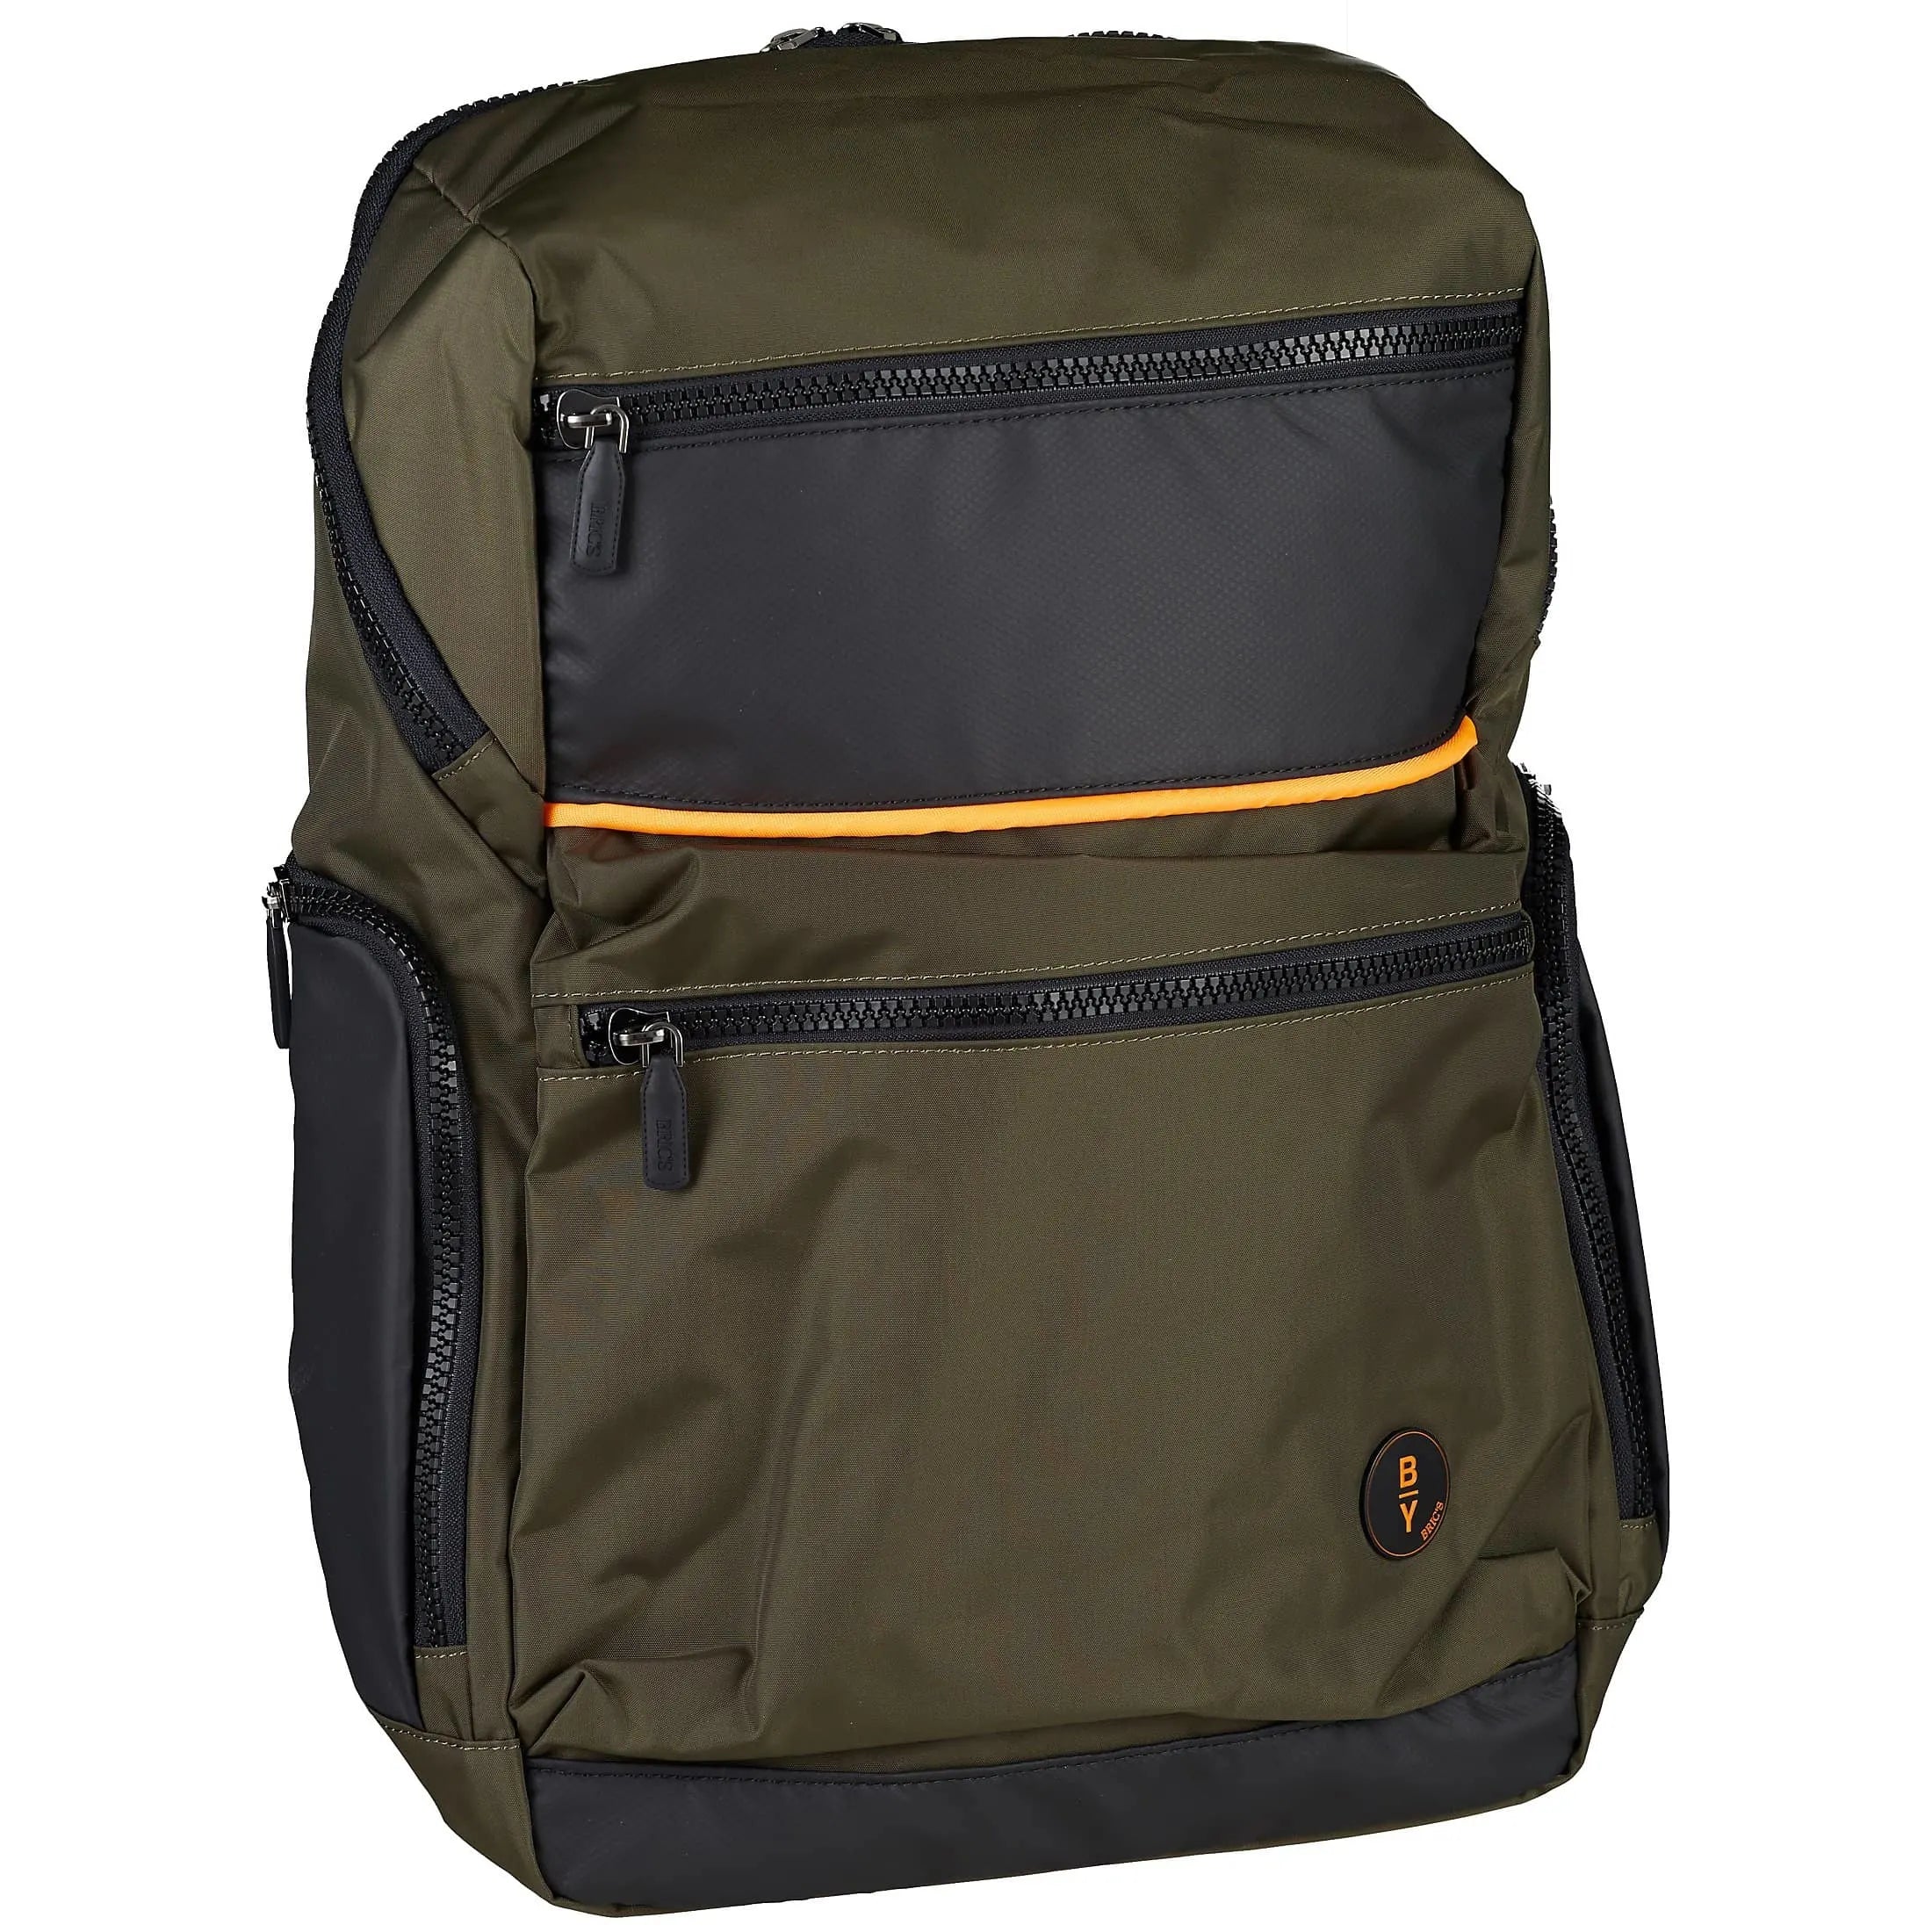 BY by Brics Eolo Business Rucksack 47 cm - olive